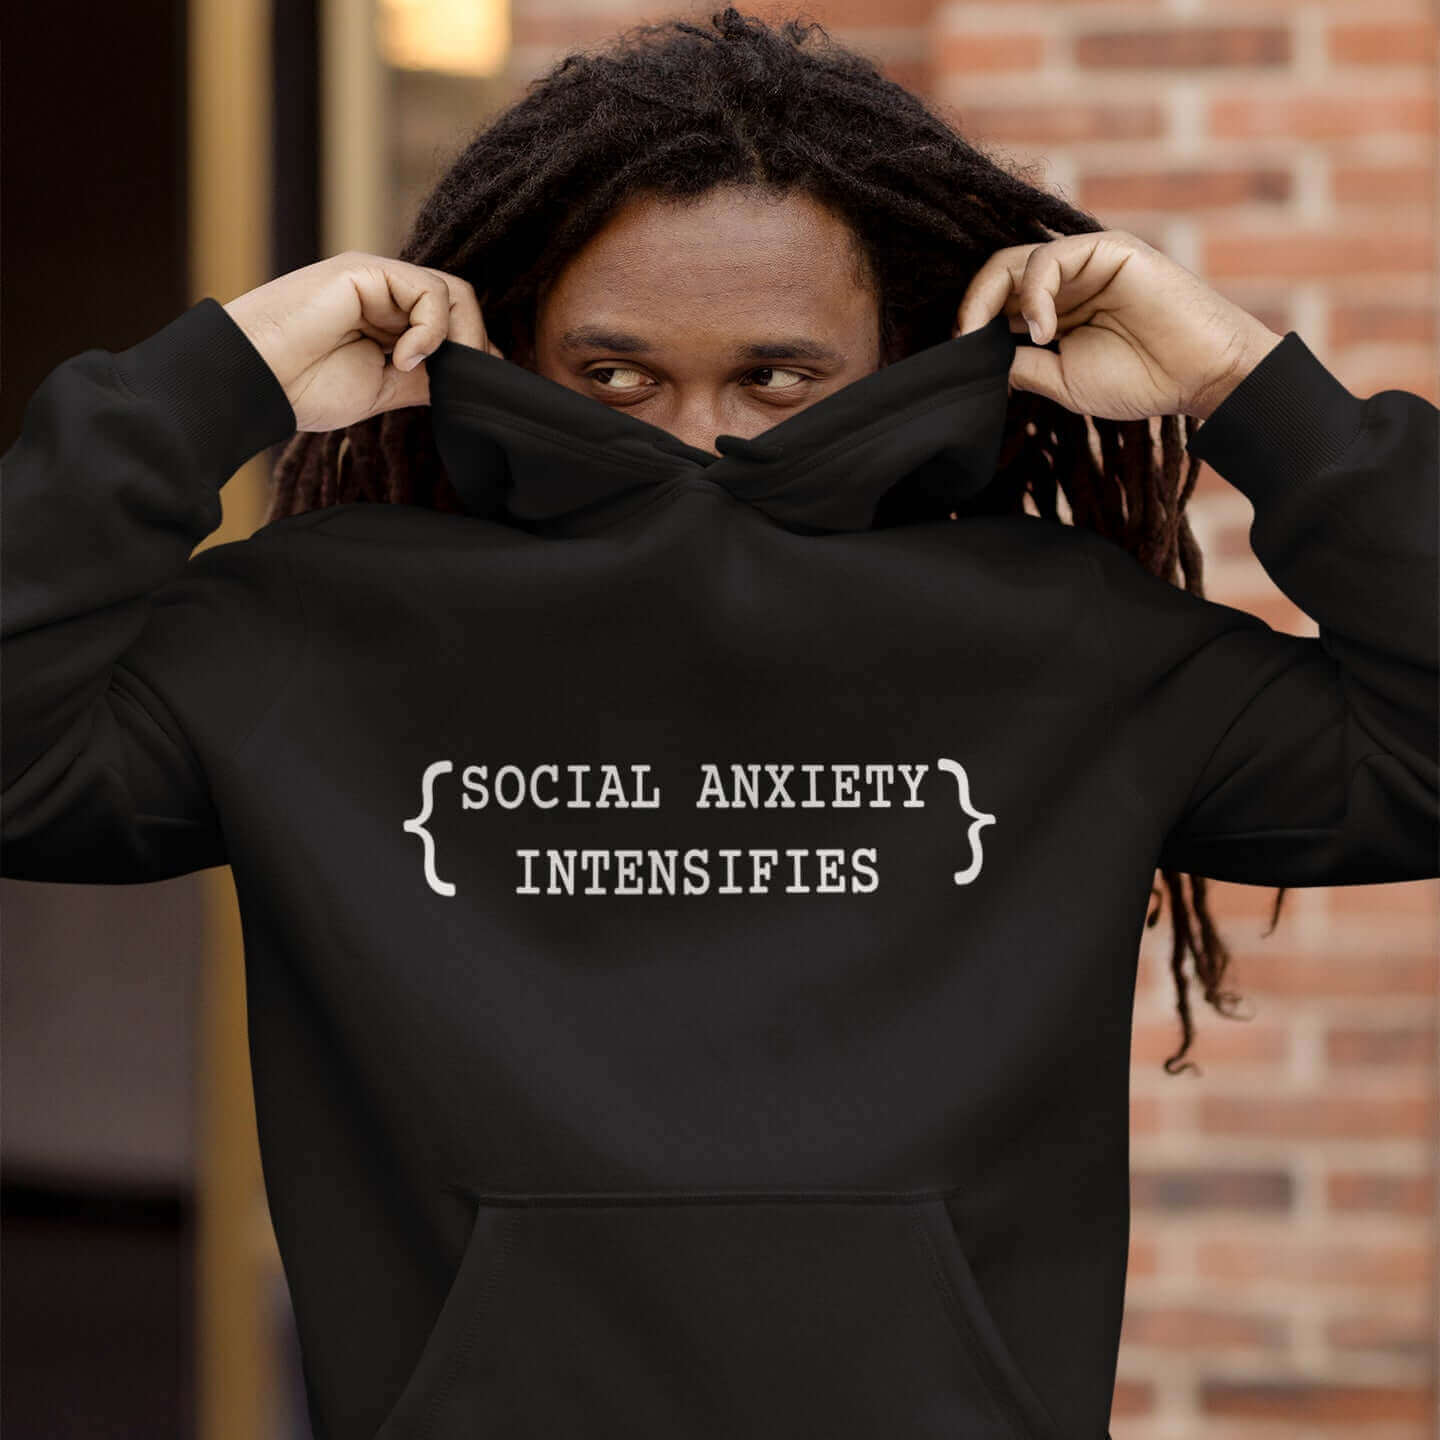 Man hiding his face in a hoodie sweatshirt. The hoodie has the words Social anxiety intensifies printed on the front.